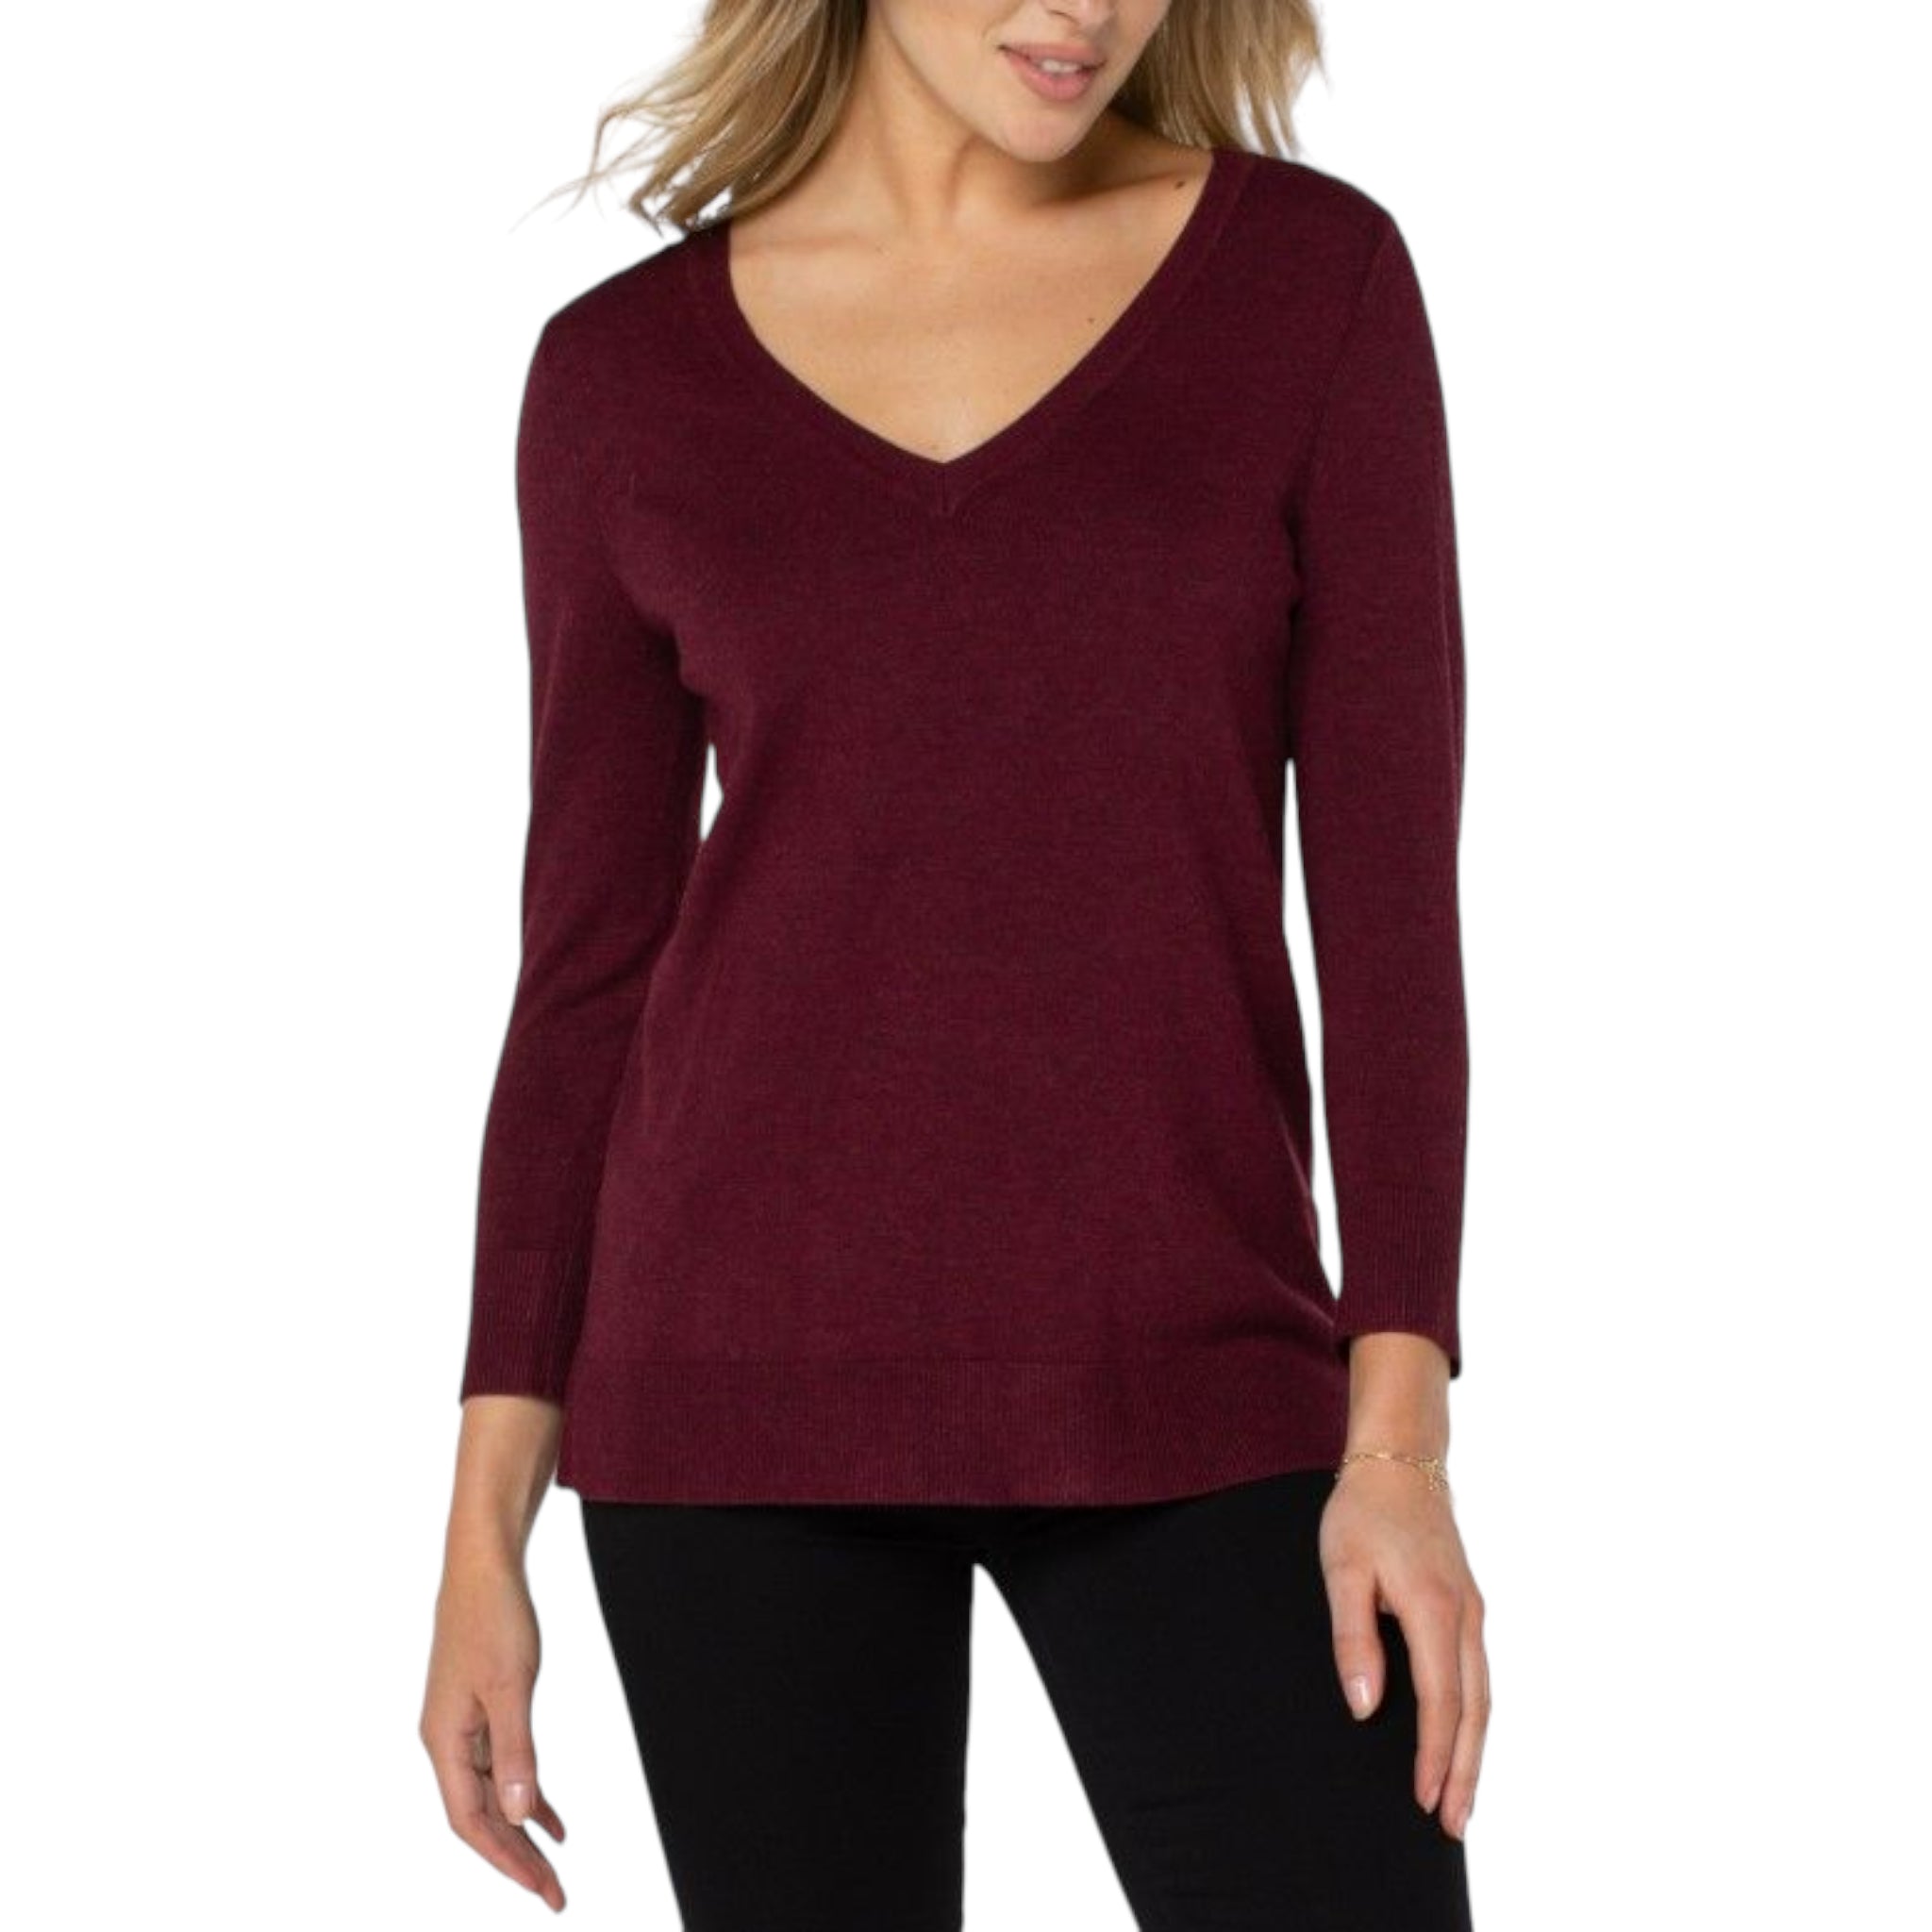 Sweater - Mulberry Heather V-Neck Sweater